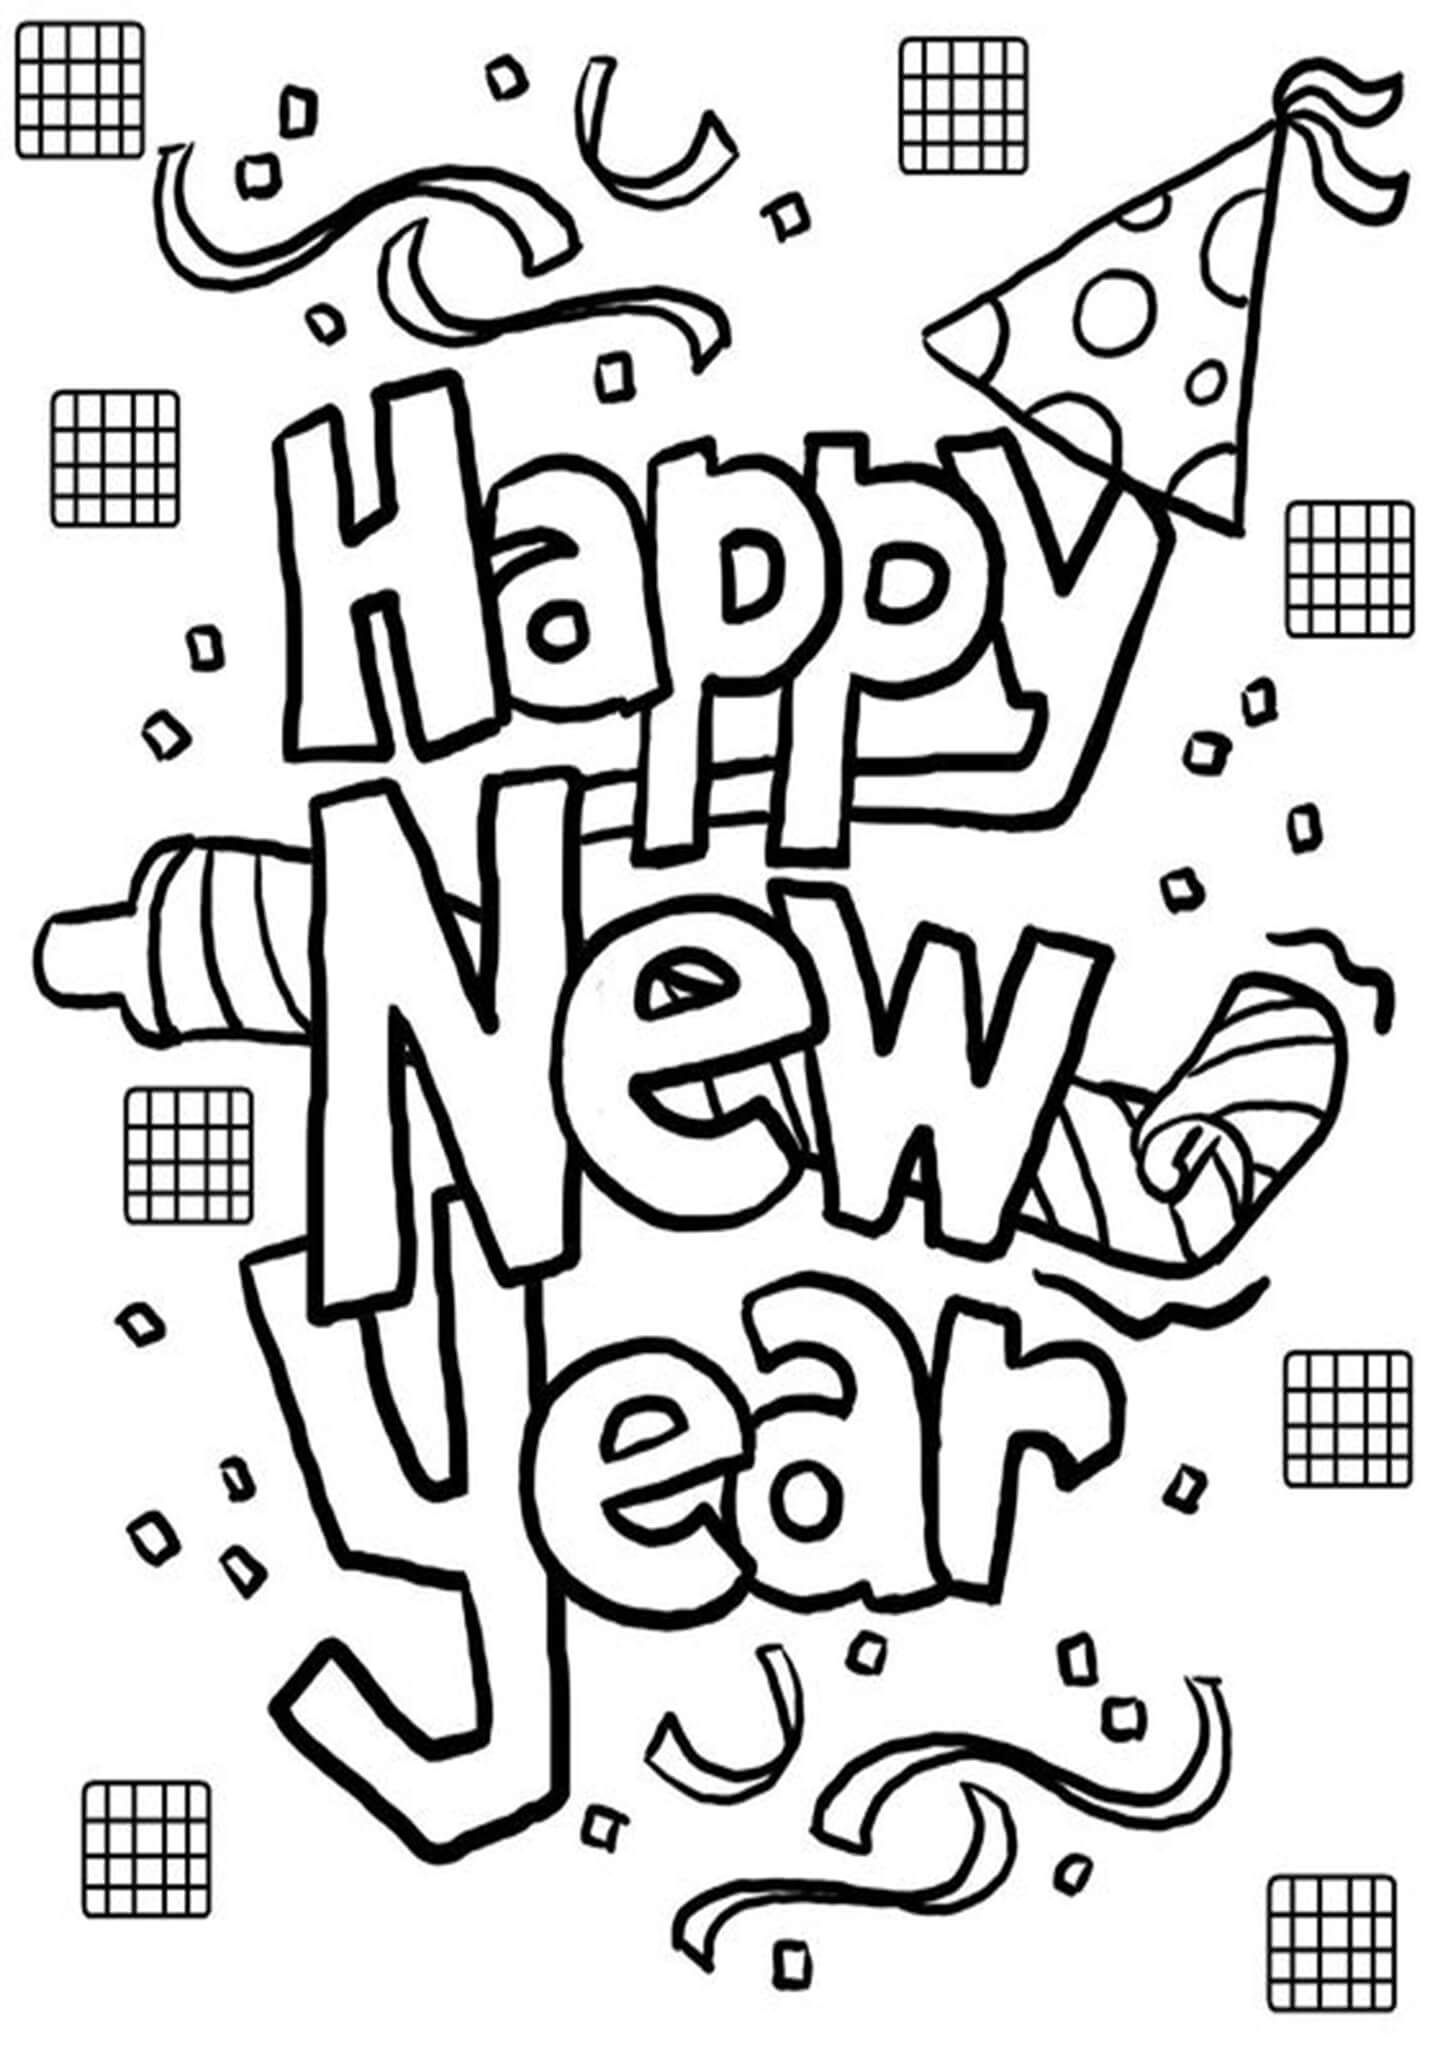 Free easy to print happy new year coloring pages new year coloring pages printable coloring pages coloring pages for kids